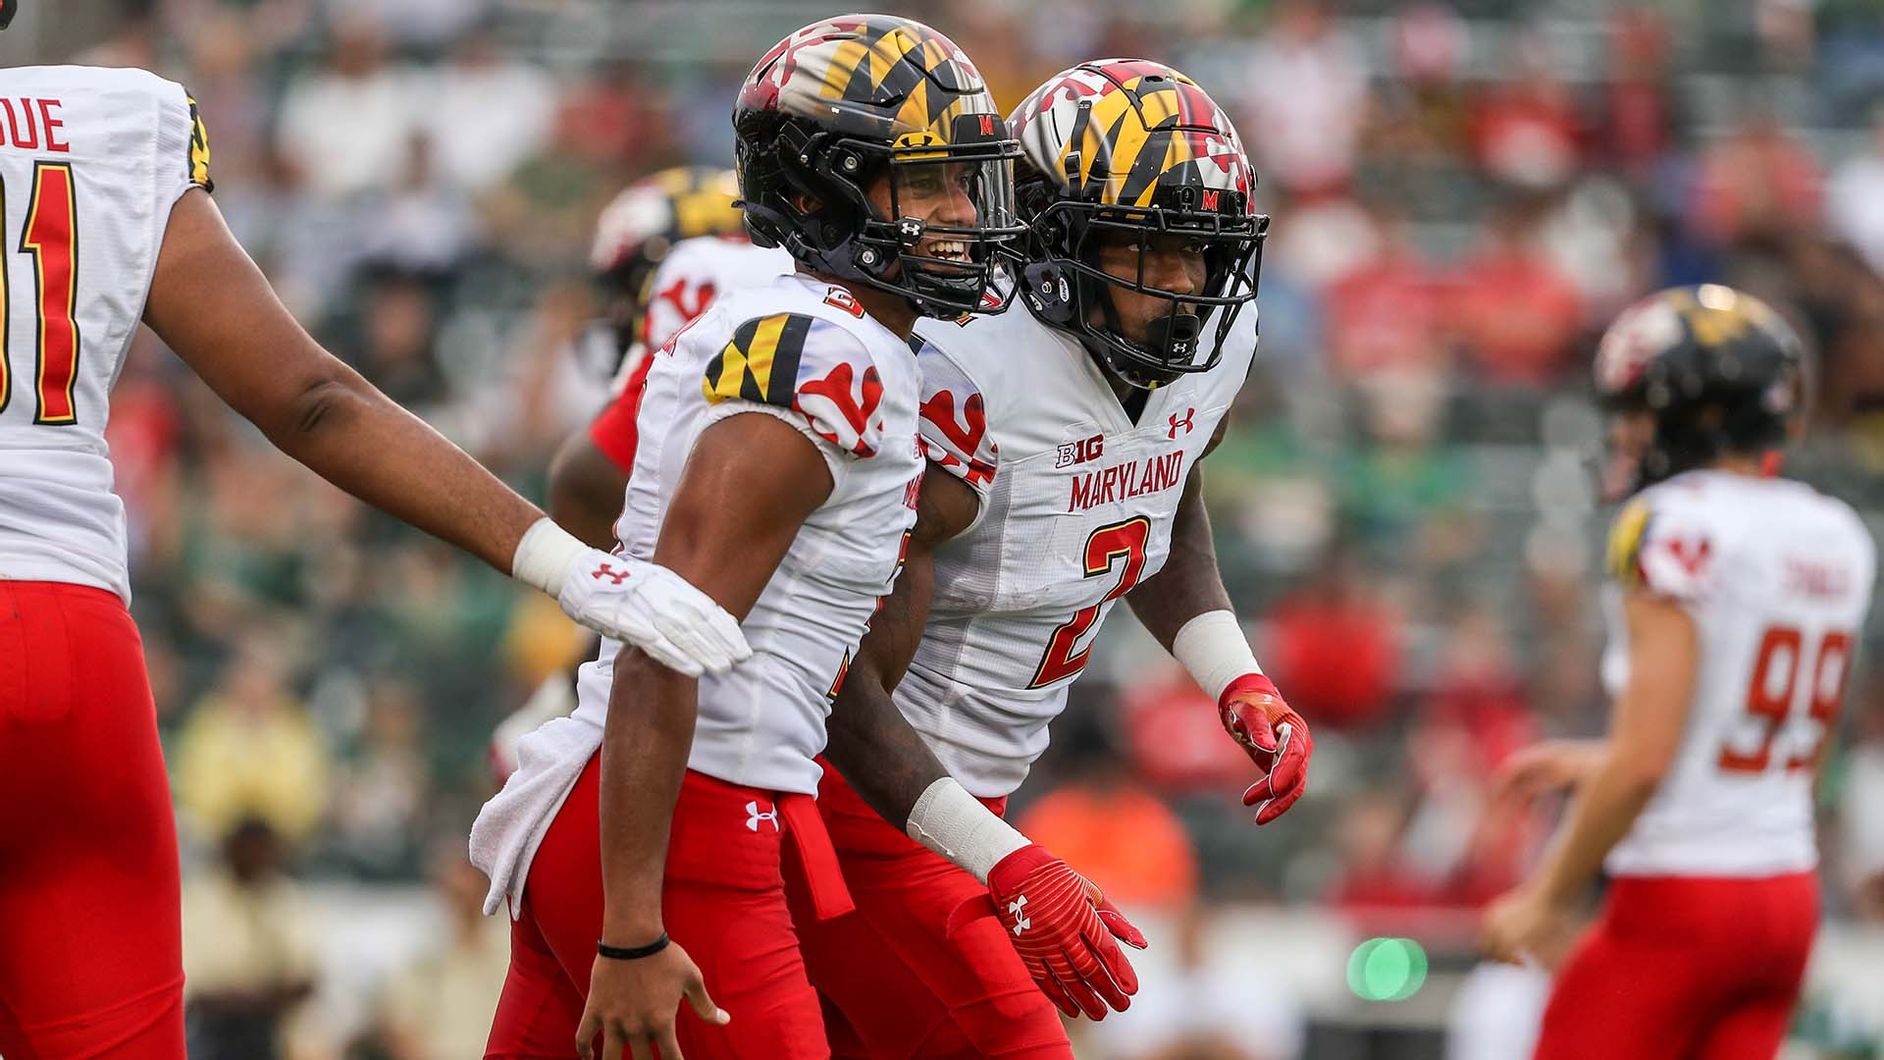 Game Preview: Maryland vs. SMU